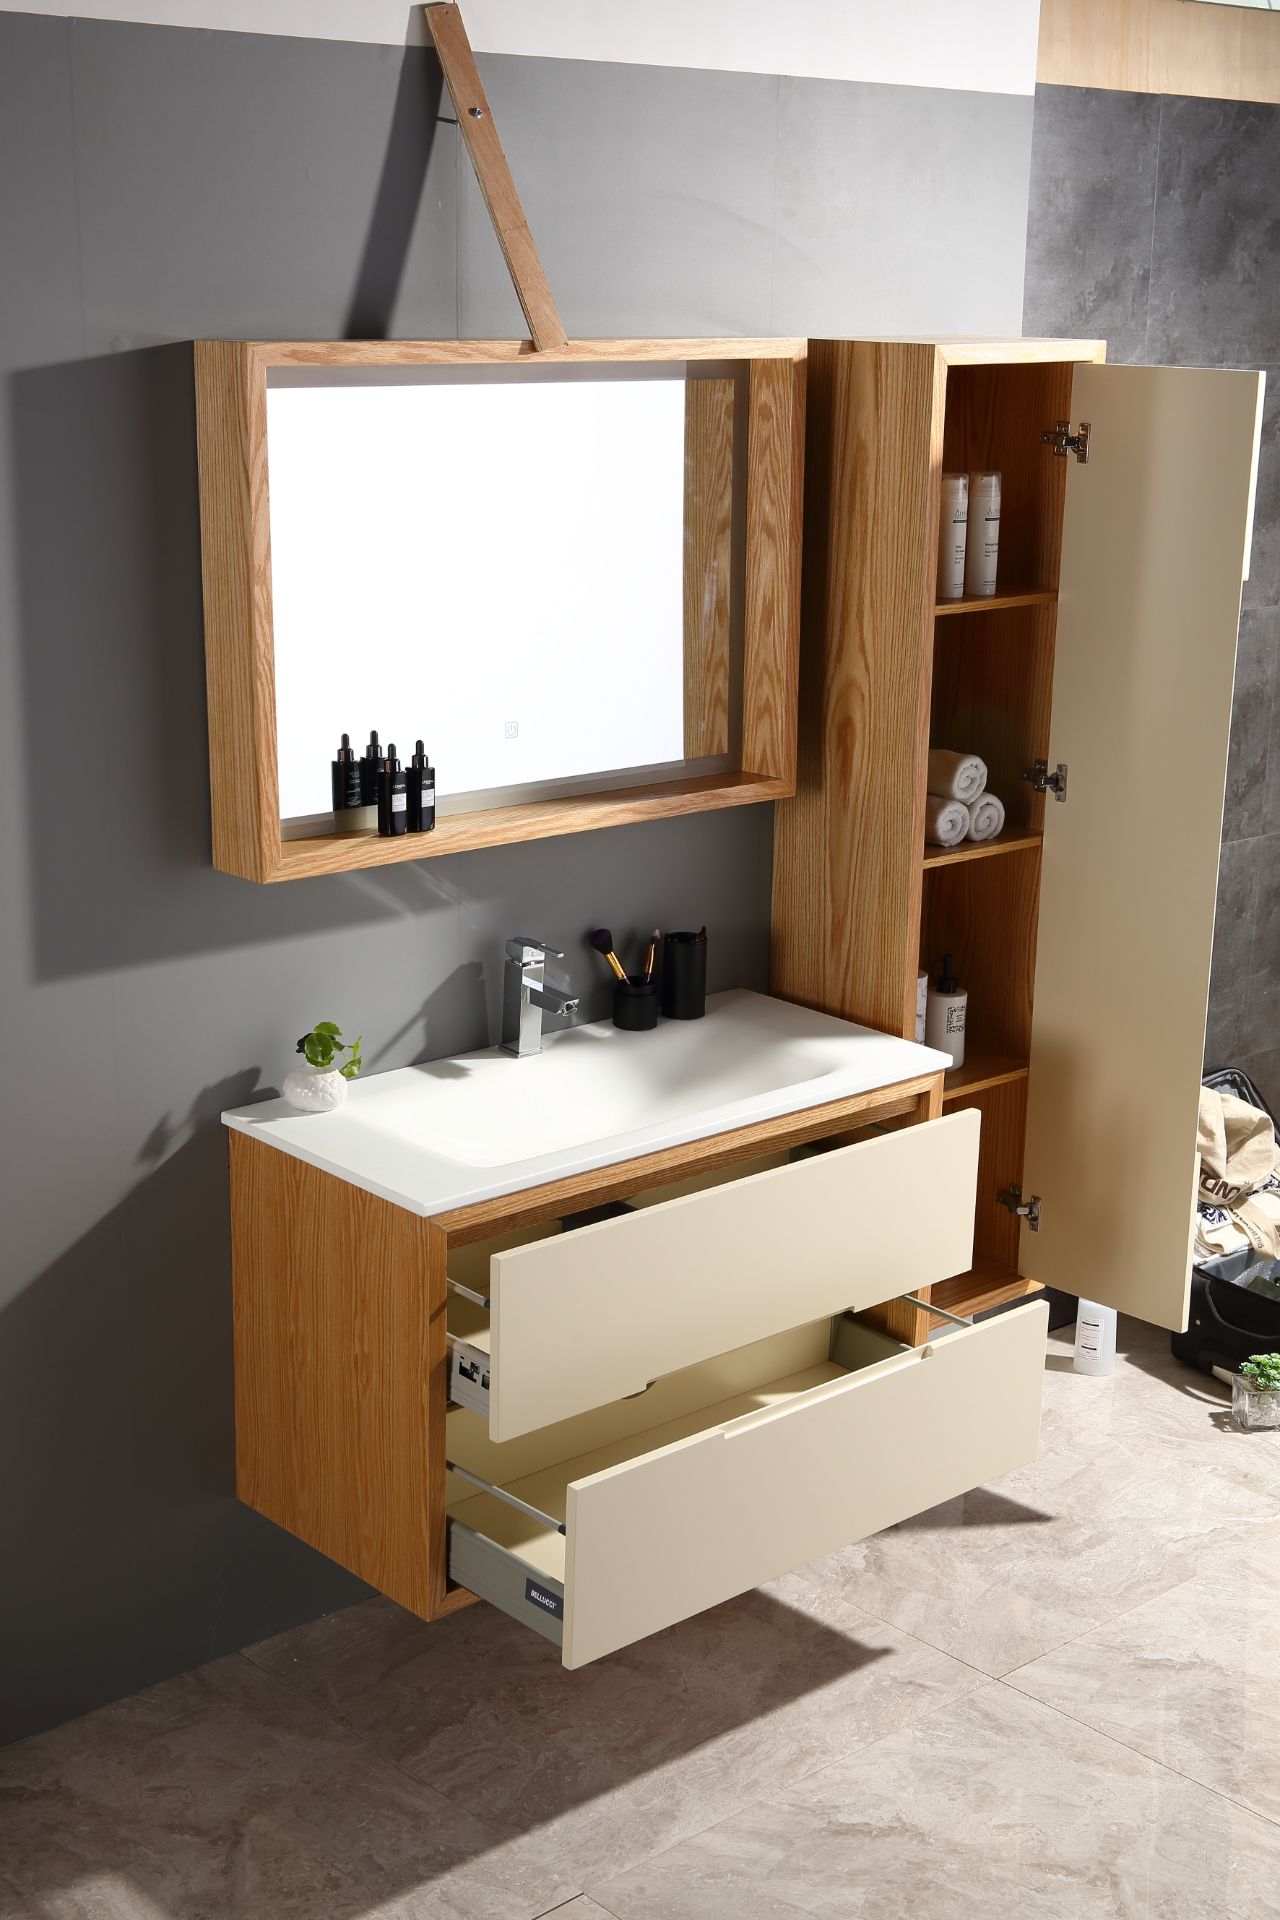 BRAND NEW 5 Sets of Complete Vanity Sets in Beige with fixtures and fittings RRP £3999.99 *NO VAT* - Image 2 of 5